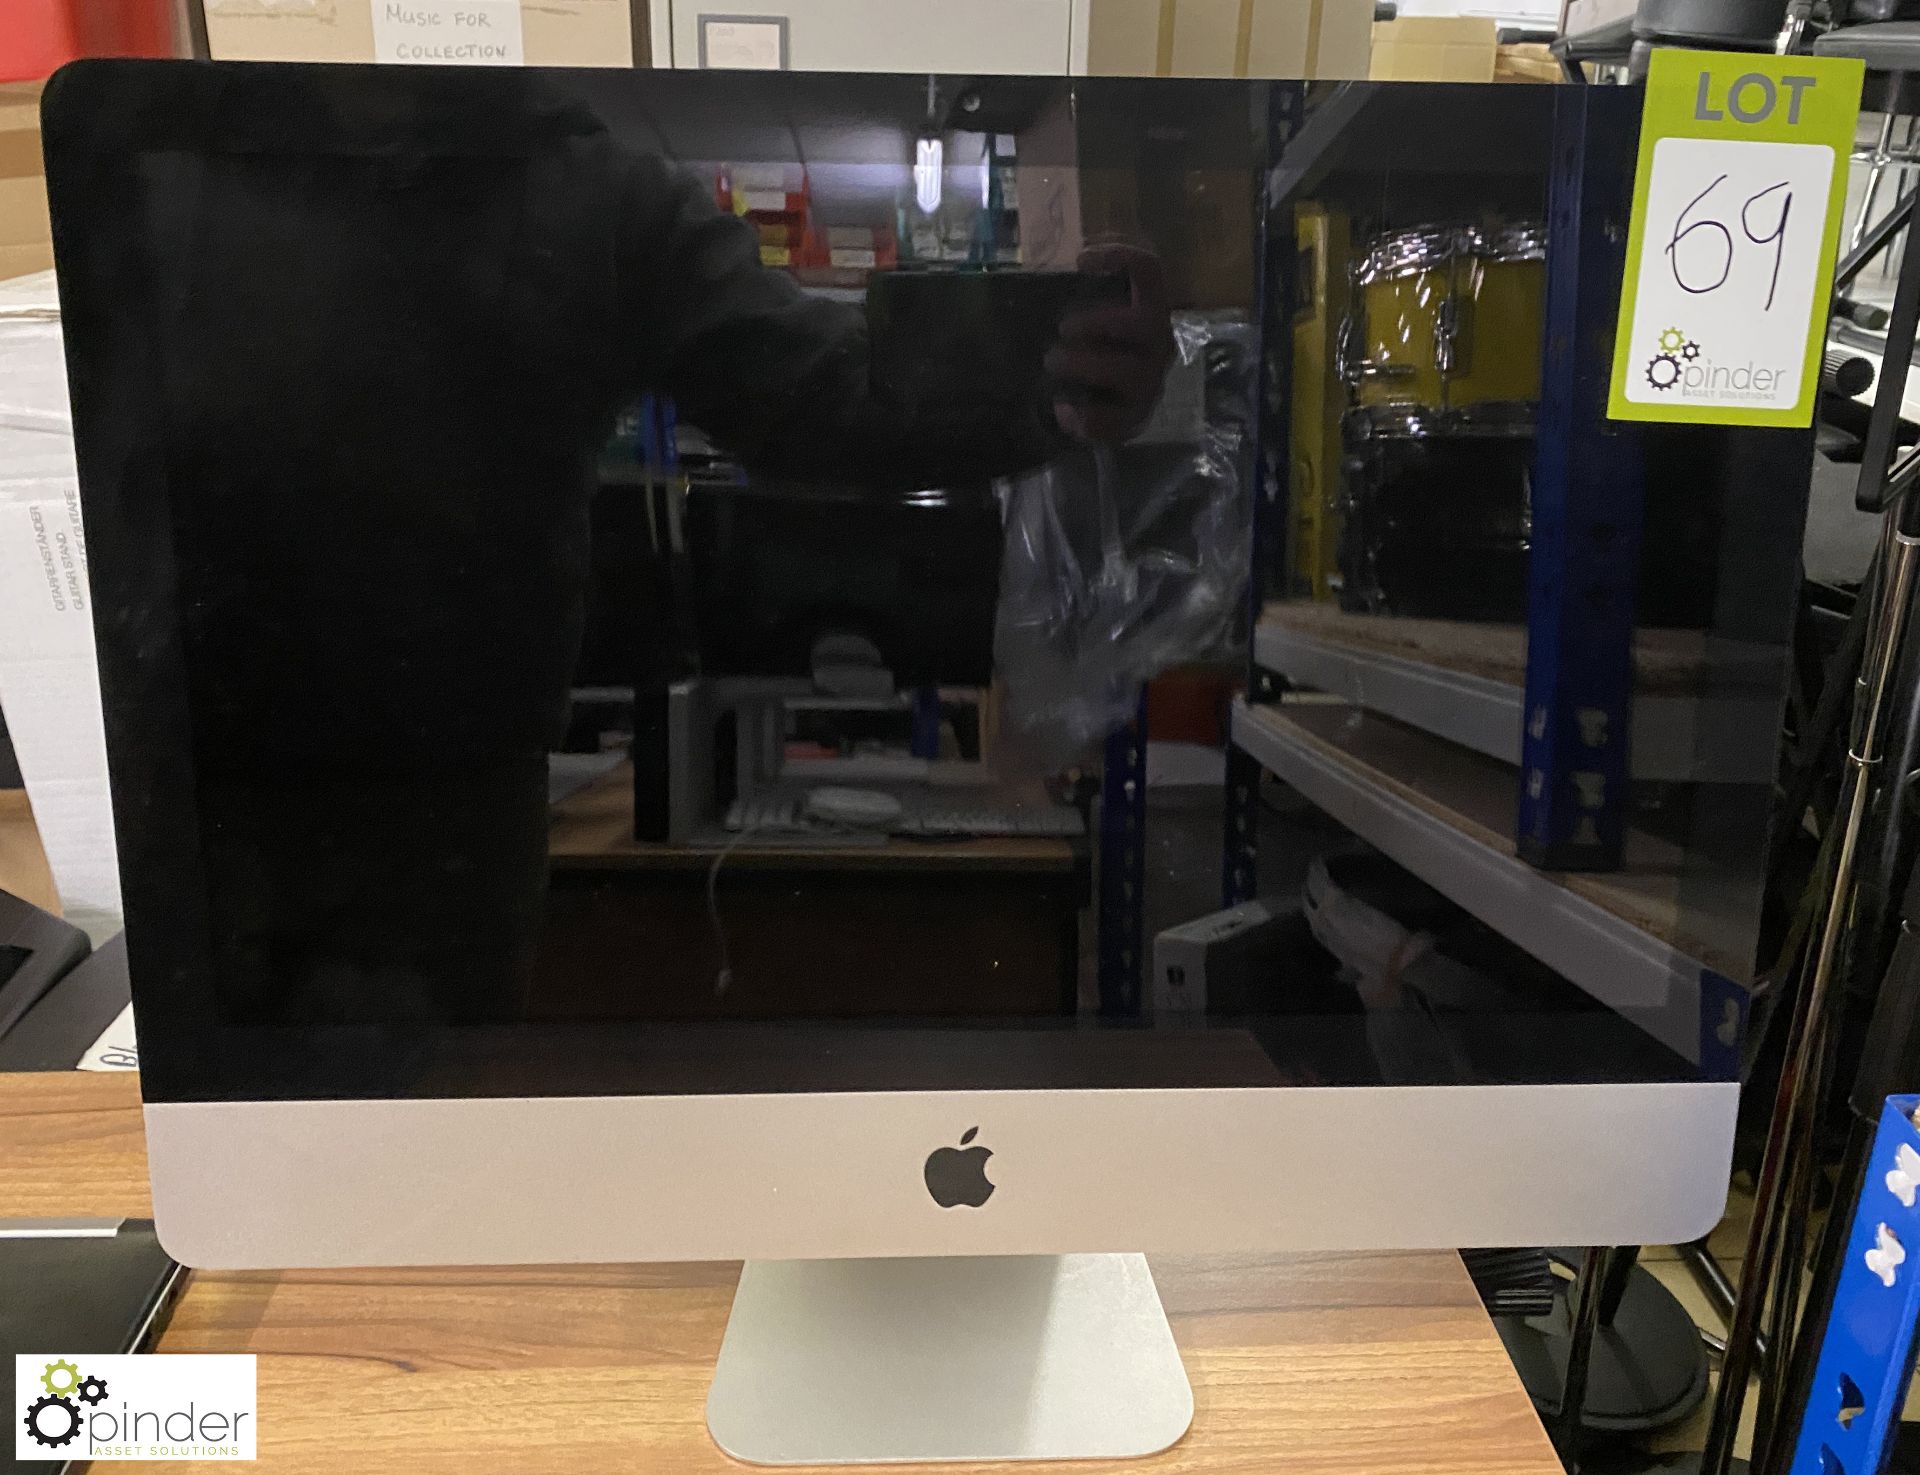 Apple iMAC A1311 Desktop PC, no keyboard, mouse, lead or passwords (no HDD)